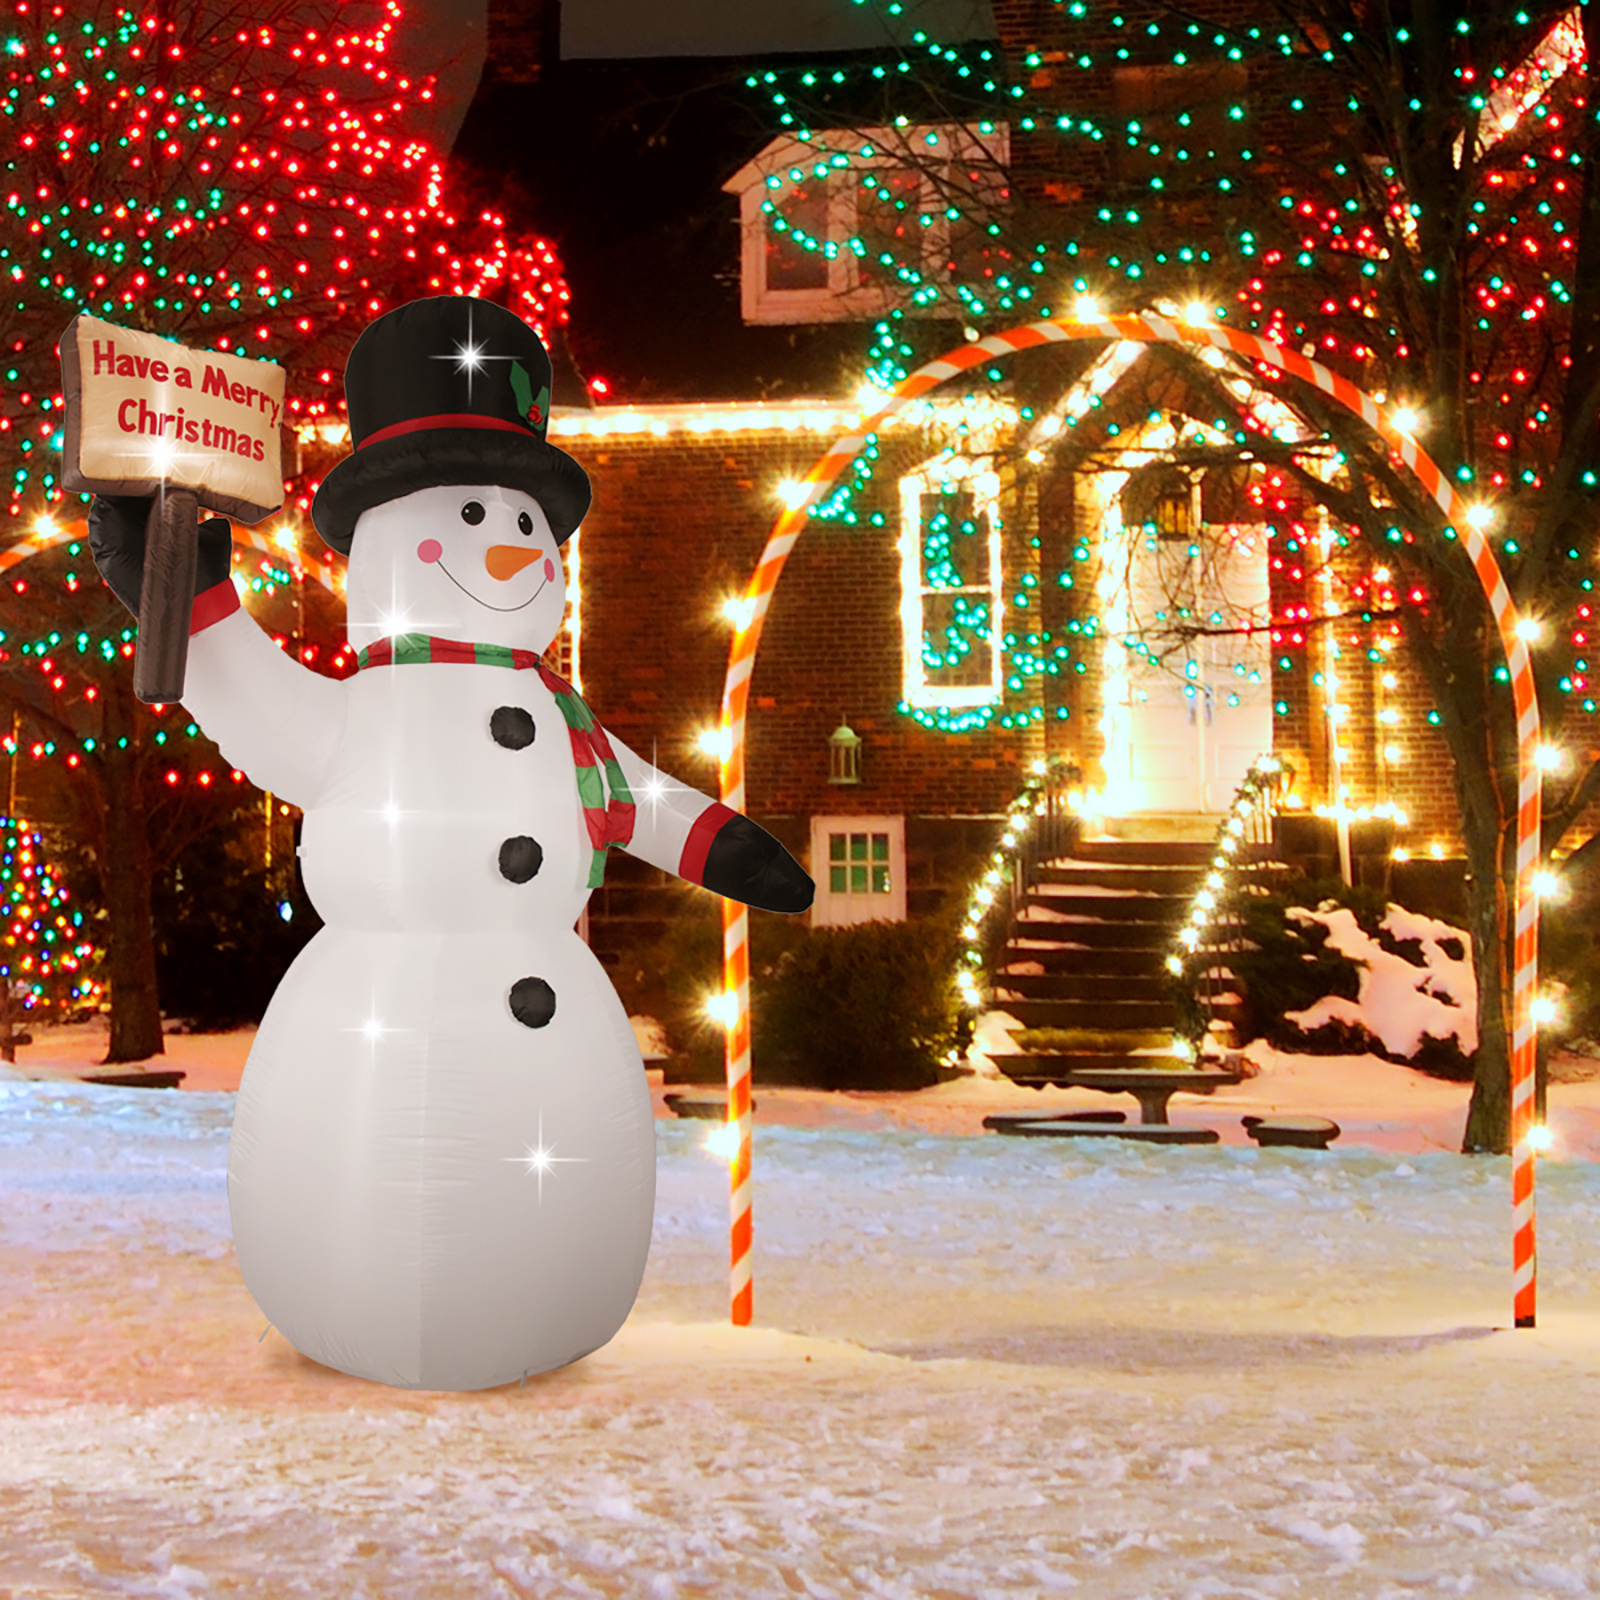 8FT Christmas Inflatable Snowman Outdoor with Led Light; Large Blow Up Snowman Yard Decorations with Merry Christmas Sign for Xmas Home Garden Family Prop Lawn Holiday Party Indoor Decor